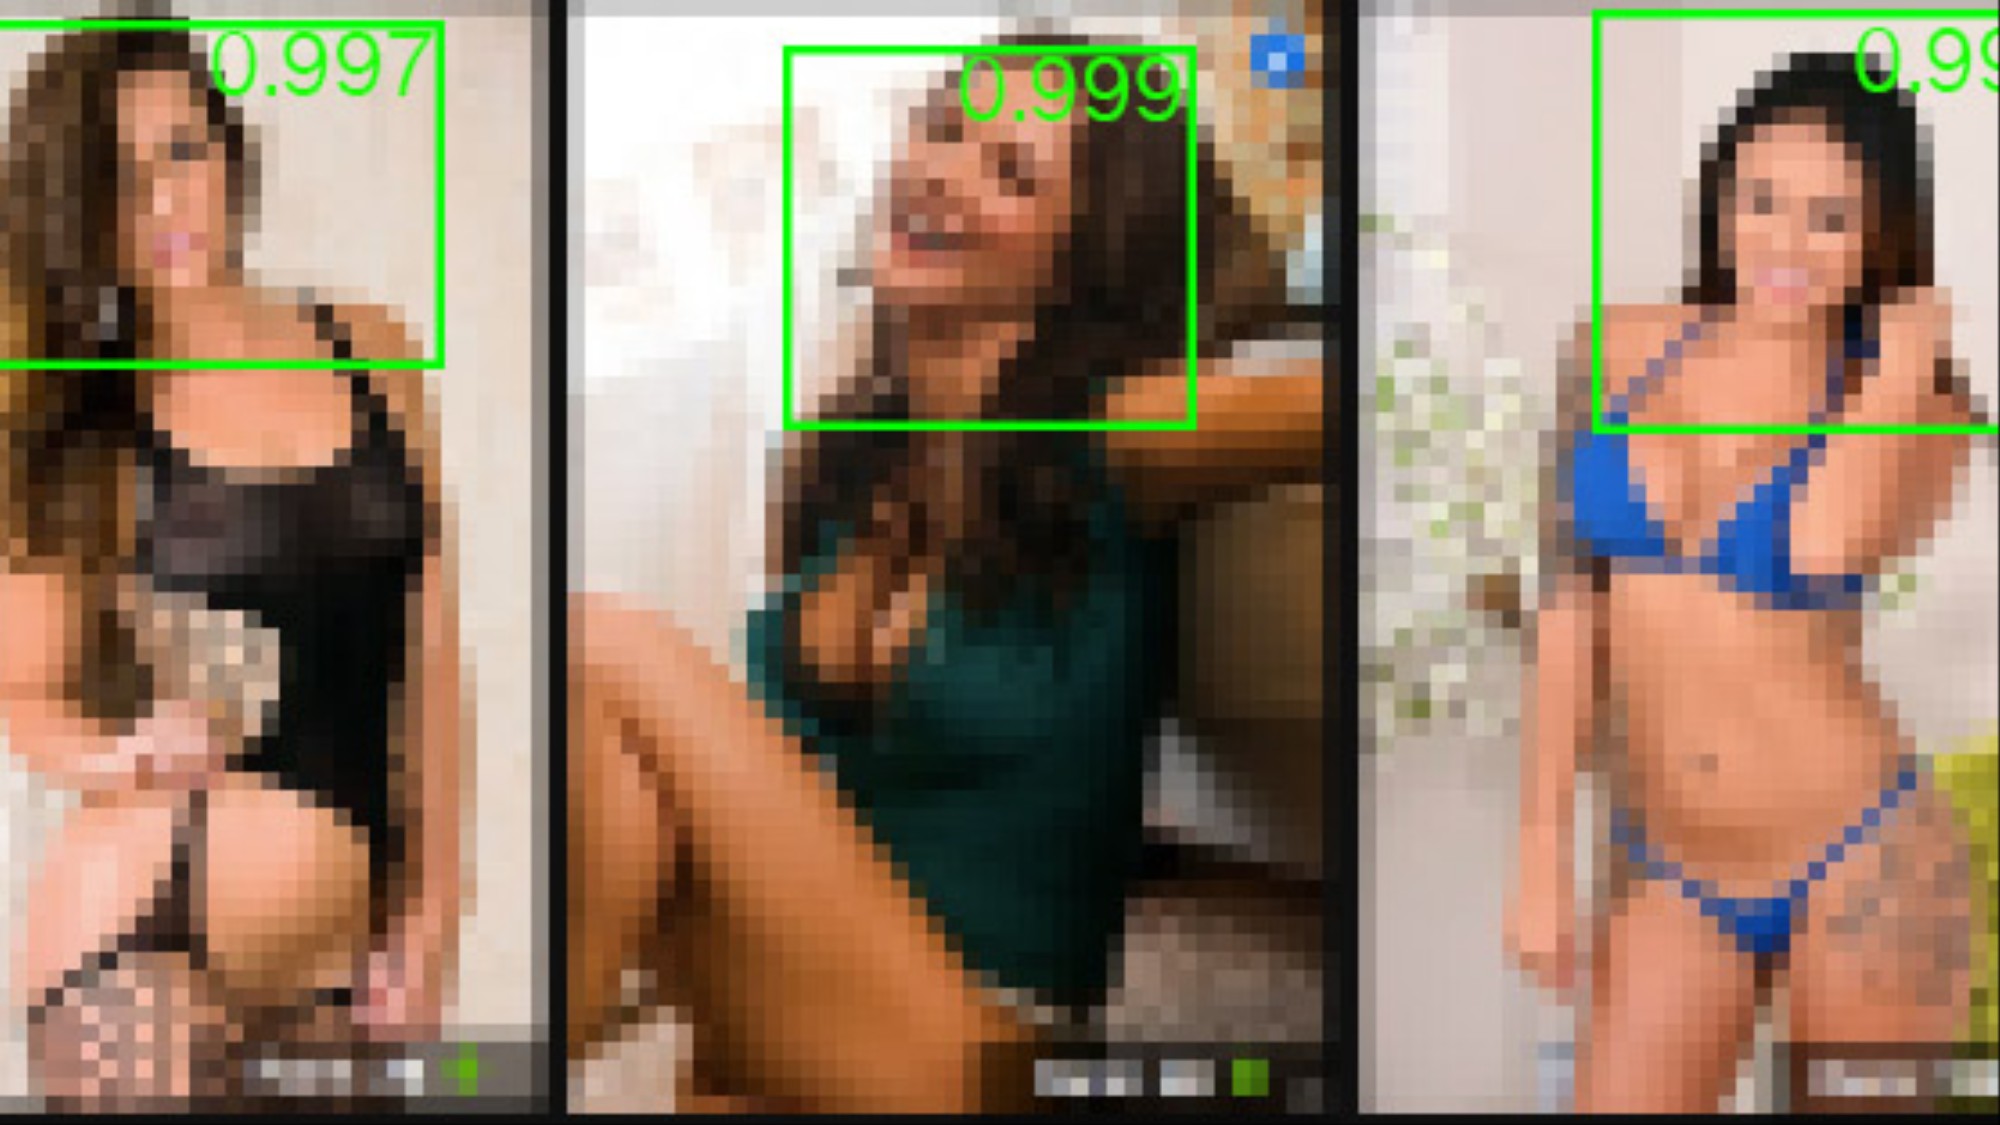 Actresses With Pornstars - Facial Recognition for Porn Stars Is a Privacy Nightmare ...